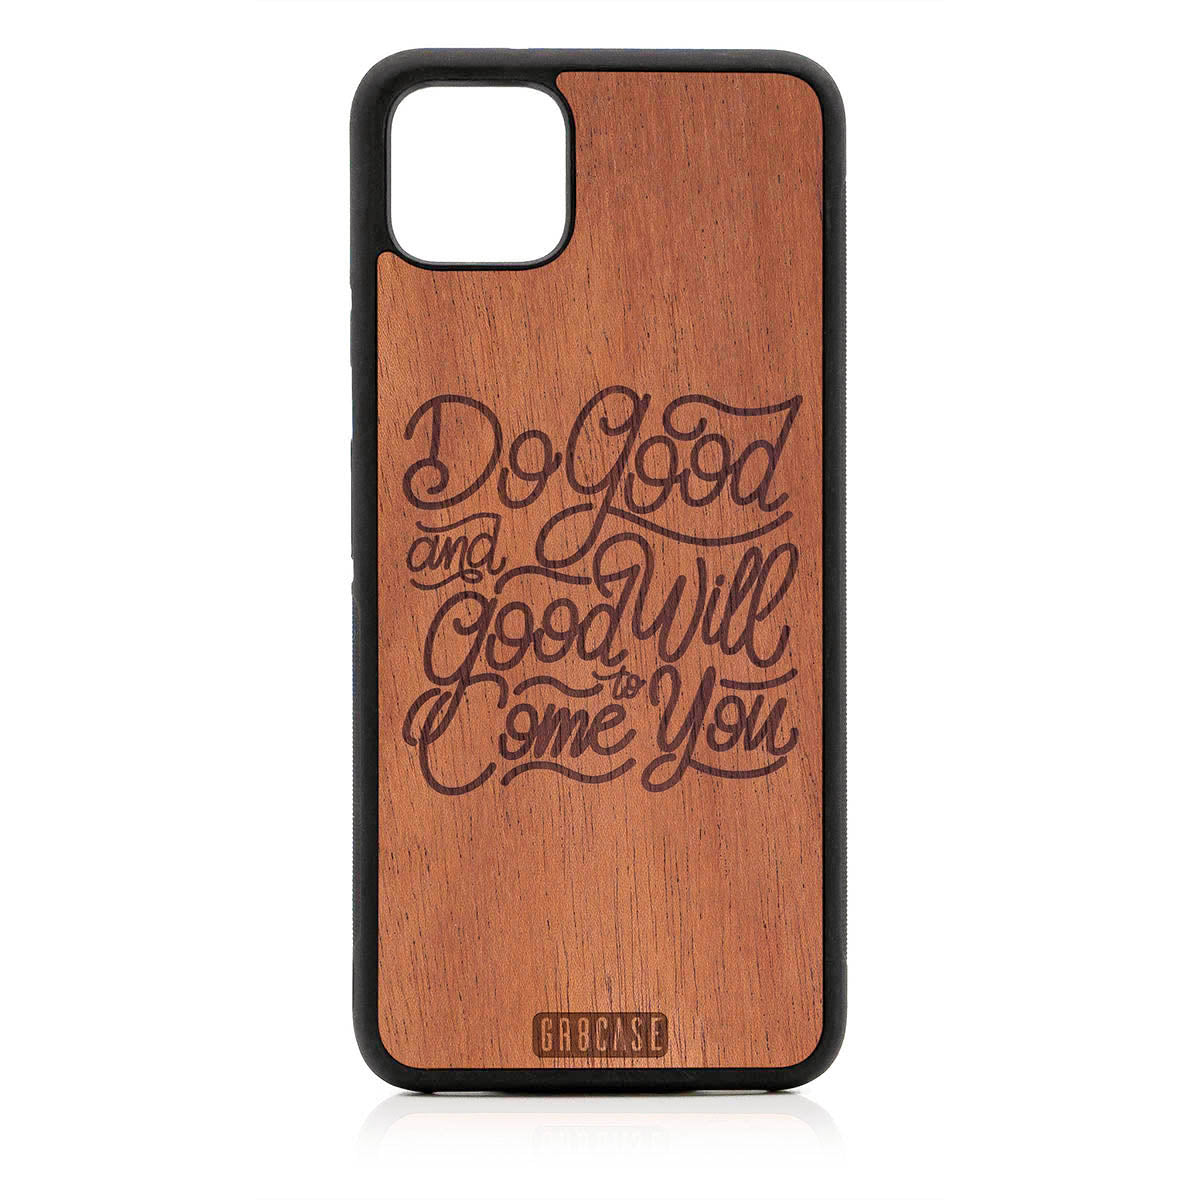 Do Good And Good Will Come To You Design Wood Case For Google Pixel 4XL by GR8CASE